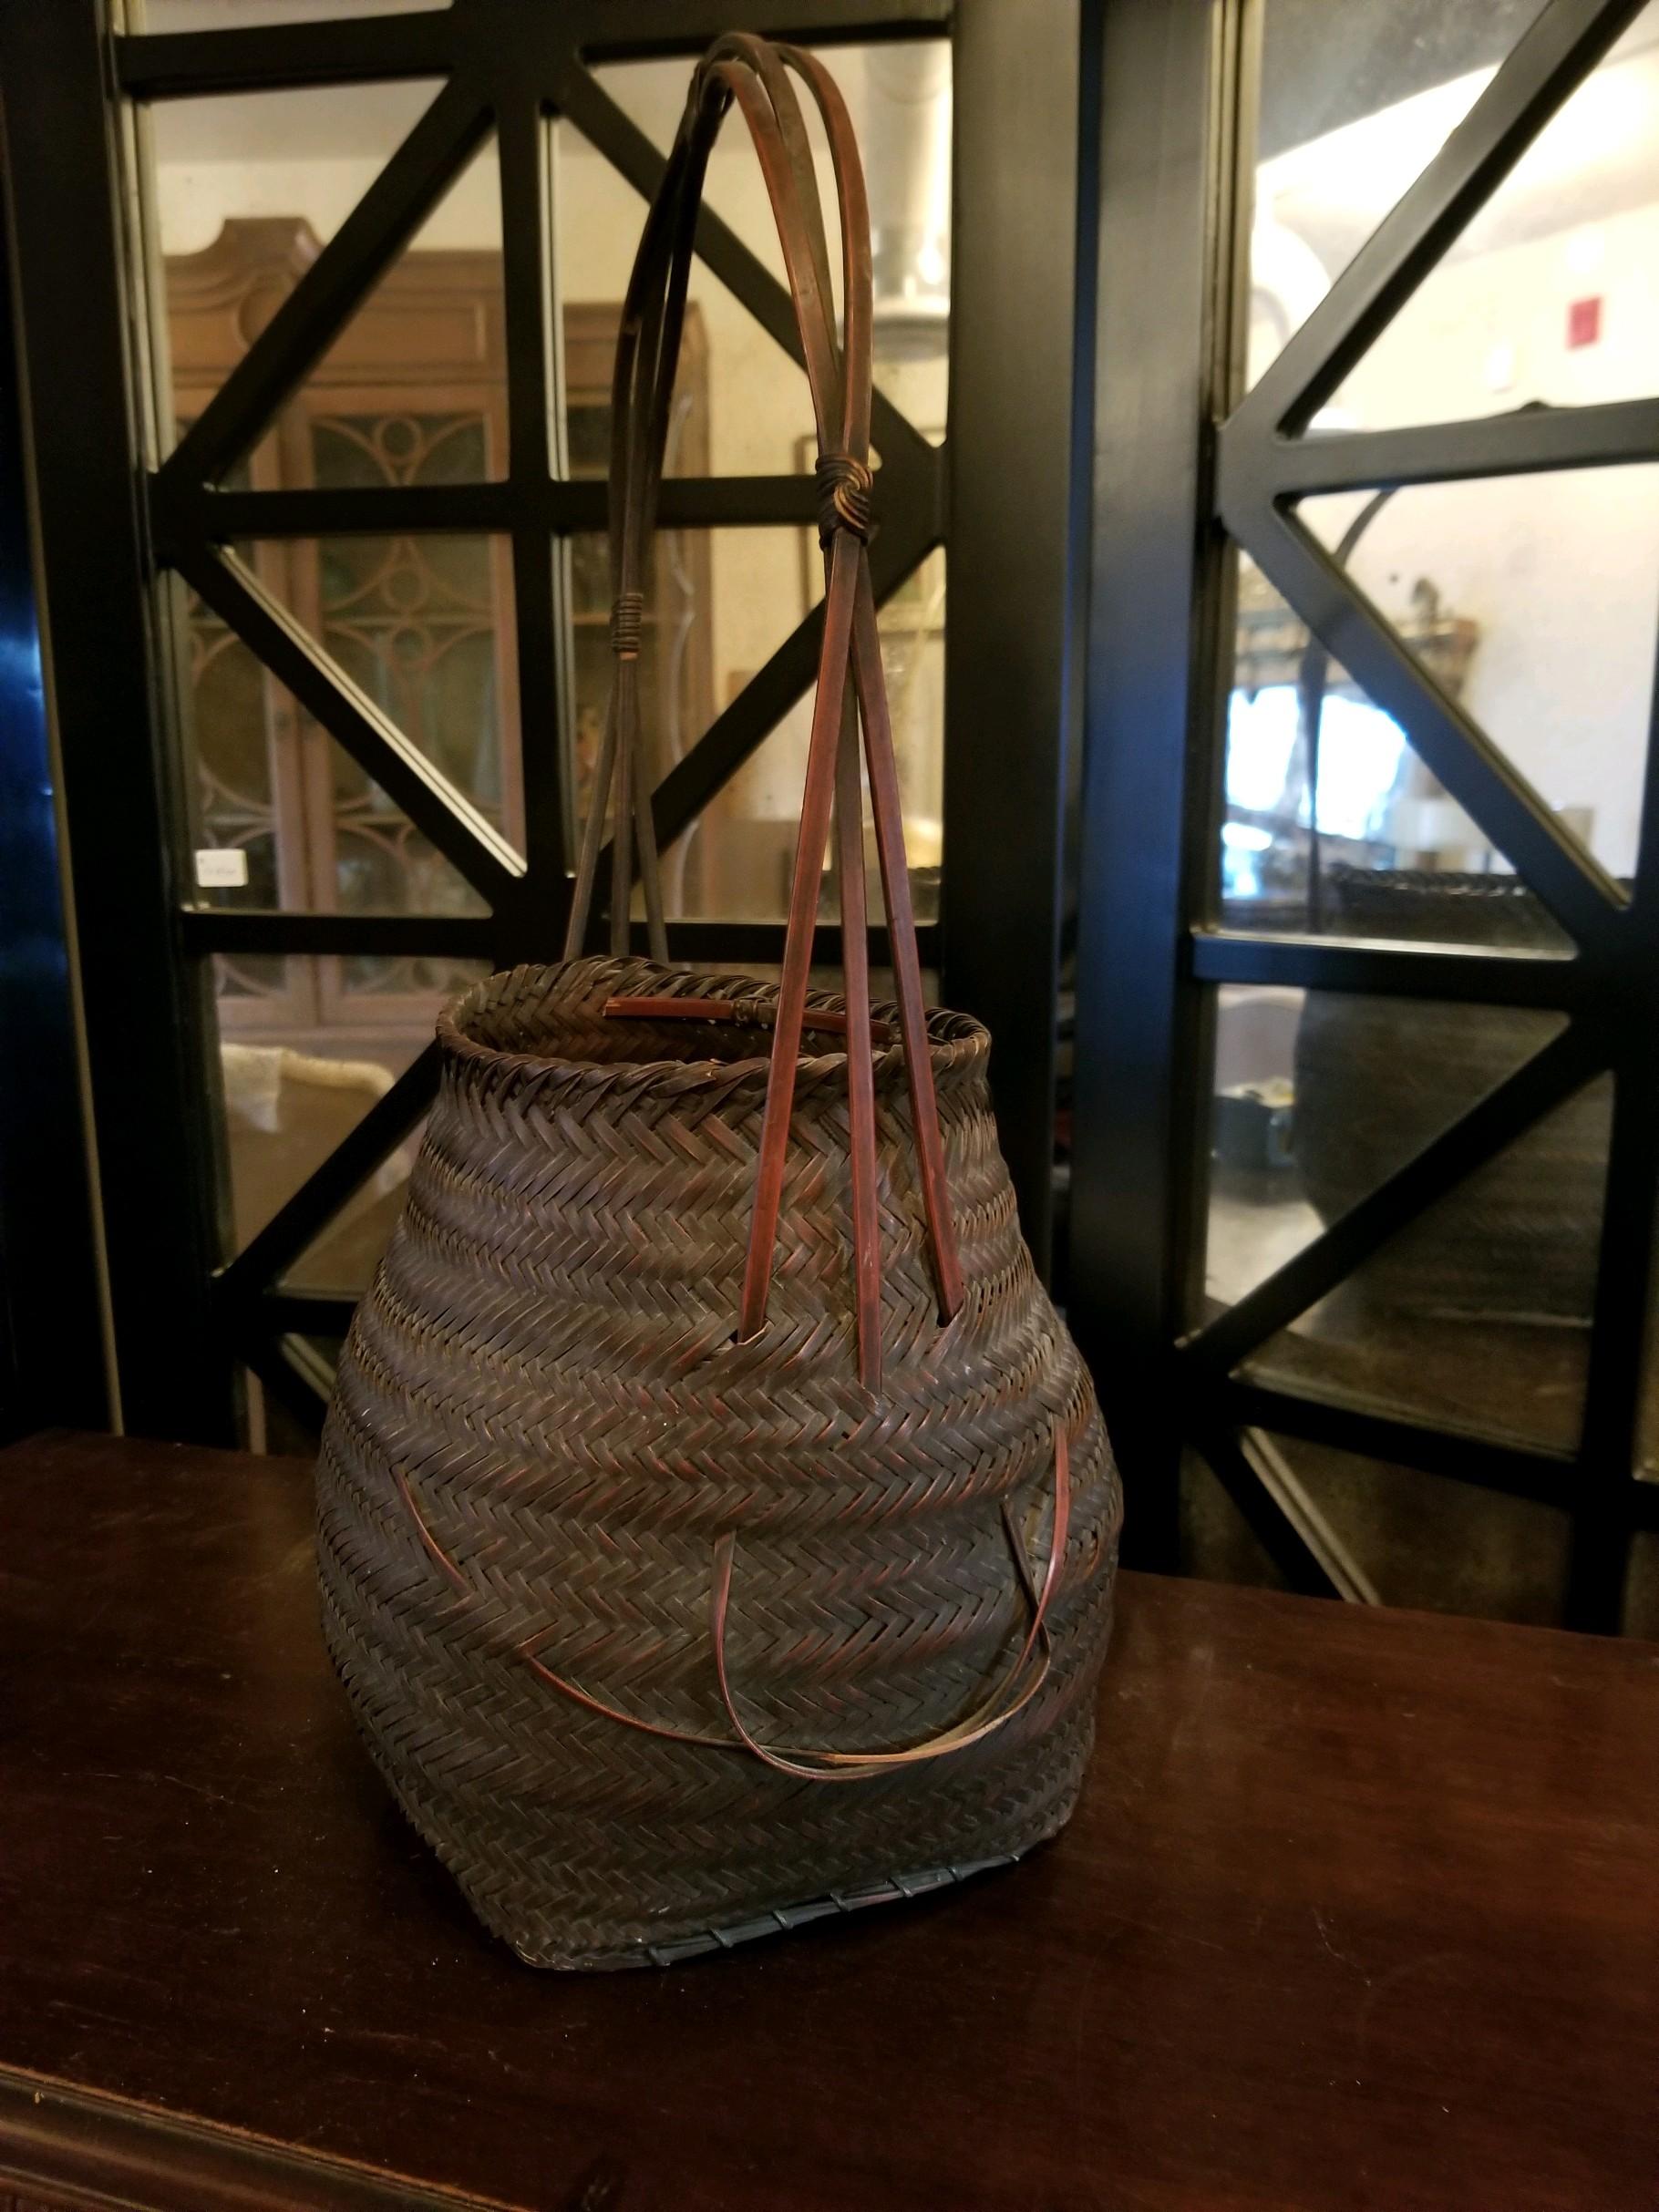 This Japanese flower arranger container is beautifully woven in fine threaded material. This is simplicity at its finest. Japanese sophistication with slight decoration across front with integrated handle. Turn of the century and in good condition.